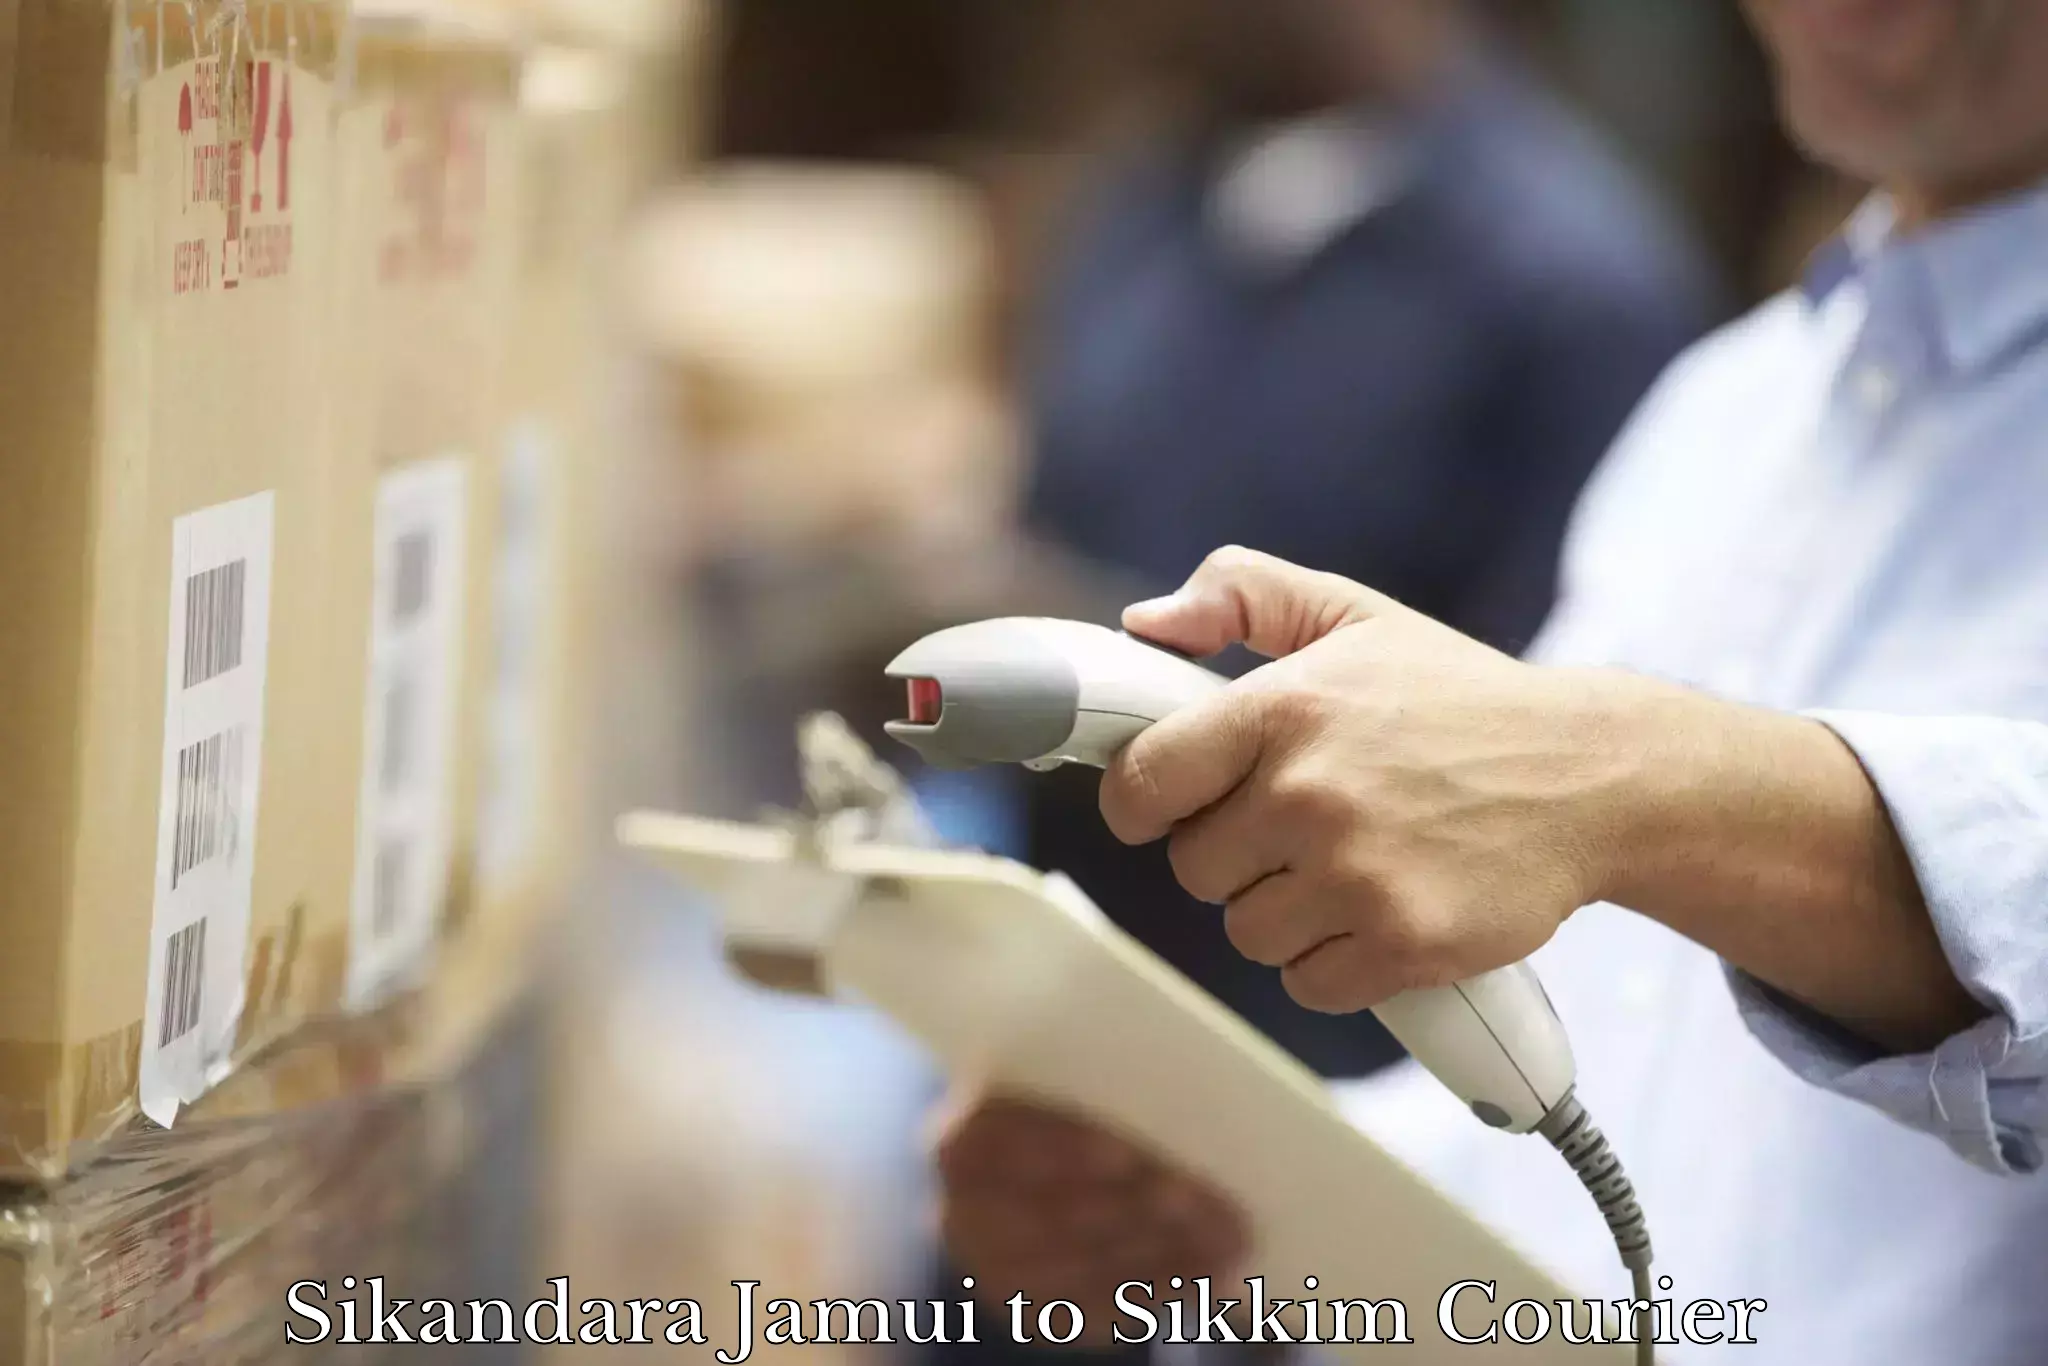 Express delivery capabilities in Sikandara Jamui to South Sikkim